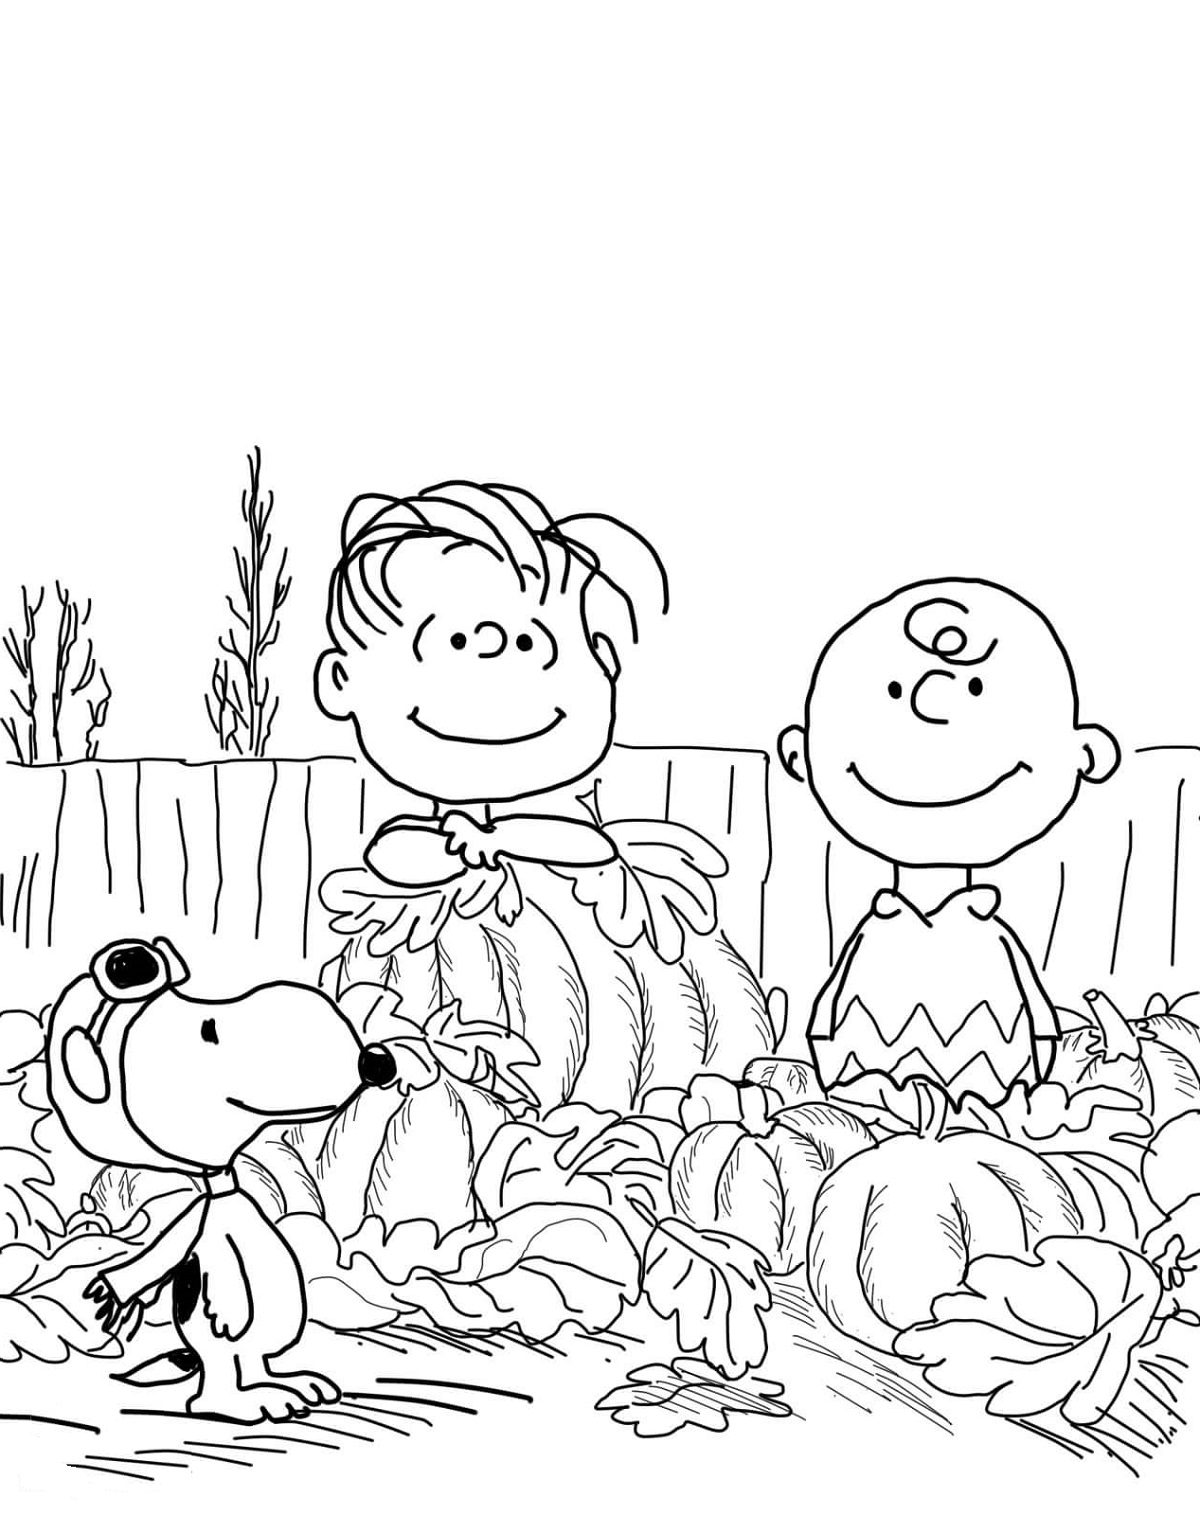 Charlie Brown and Snoopy Peanuts Coloring Pages